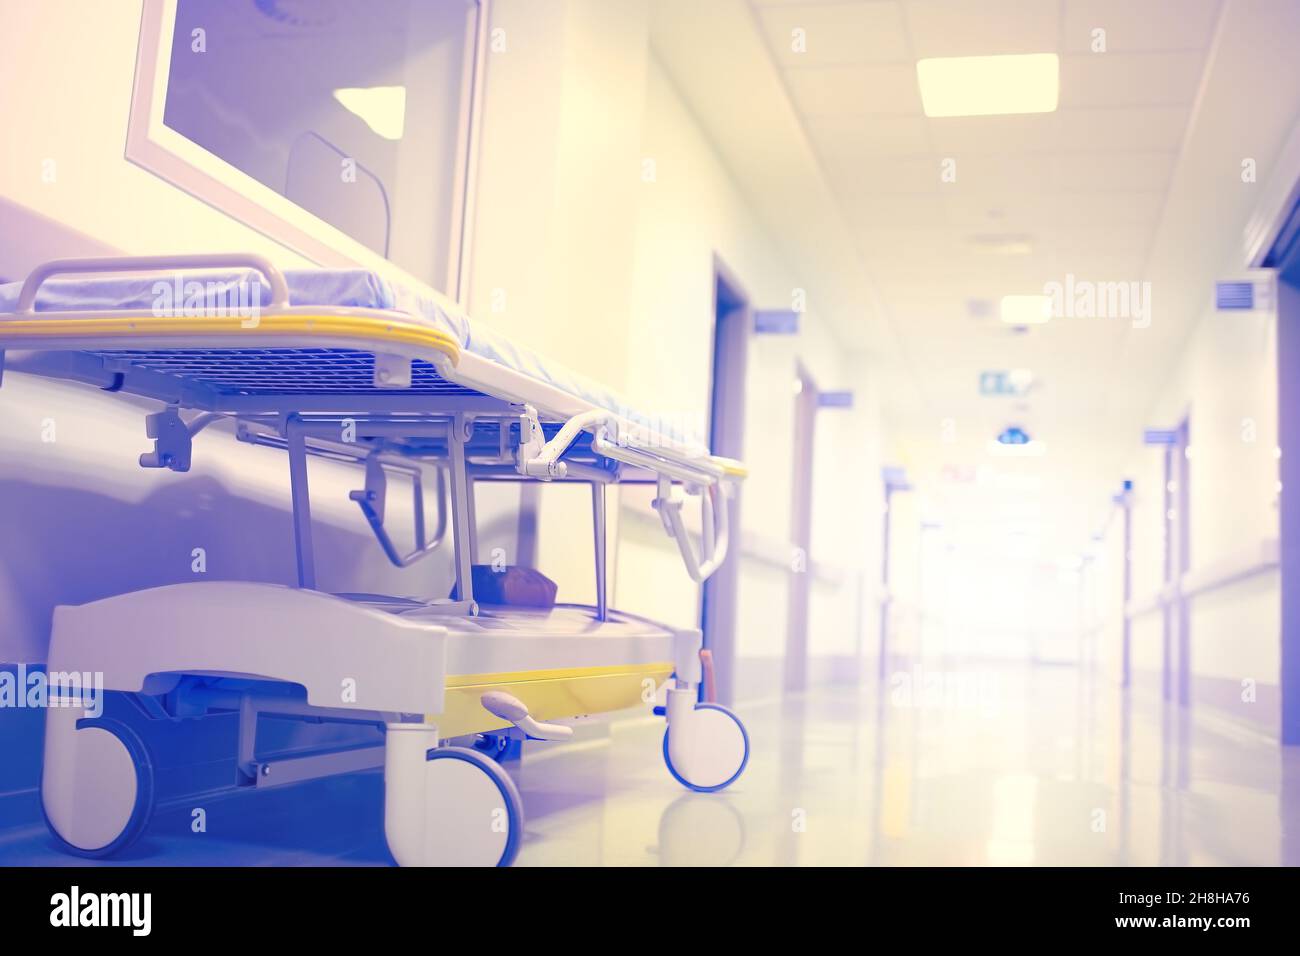 Stretcher in the empty hospital corridor ending with a flash of light. Stock Photo